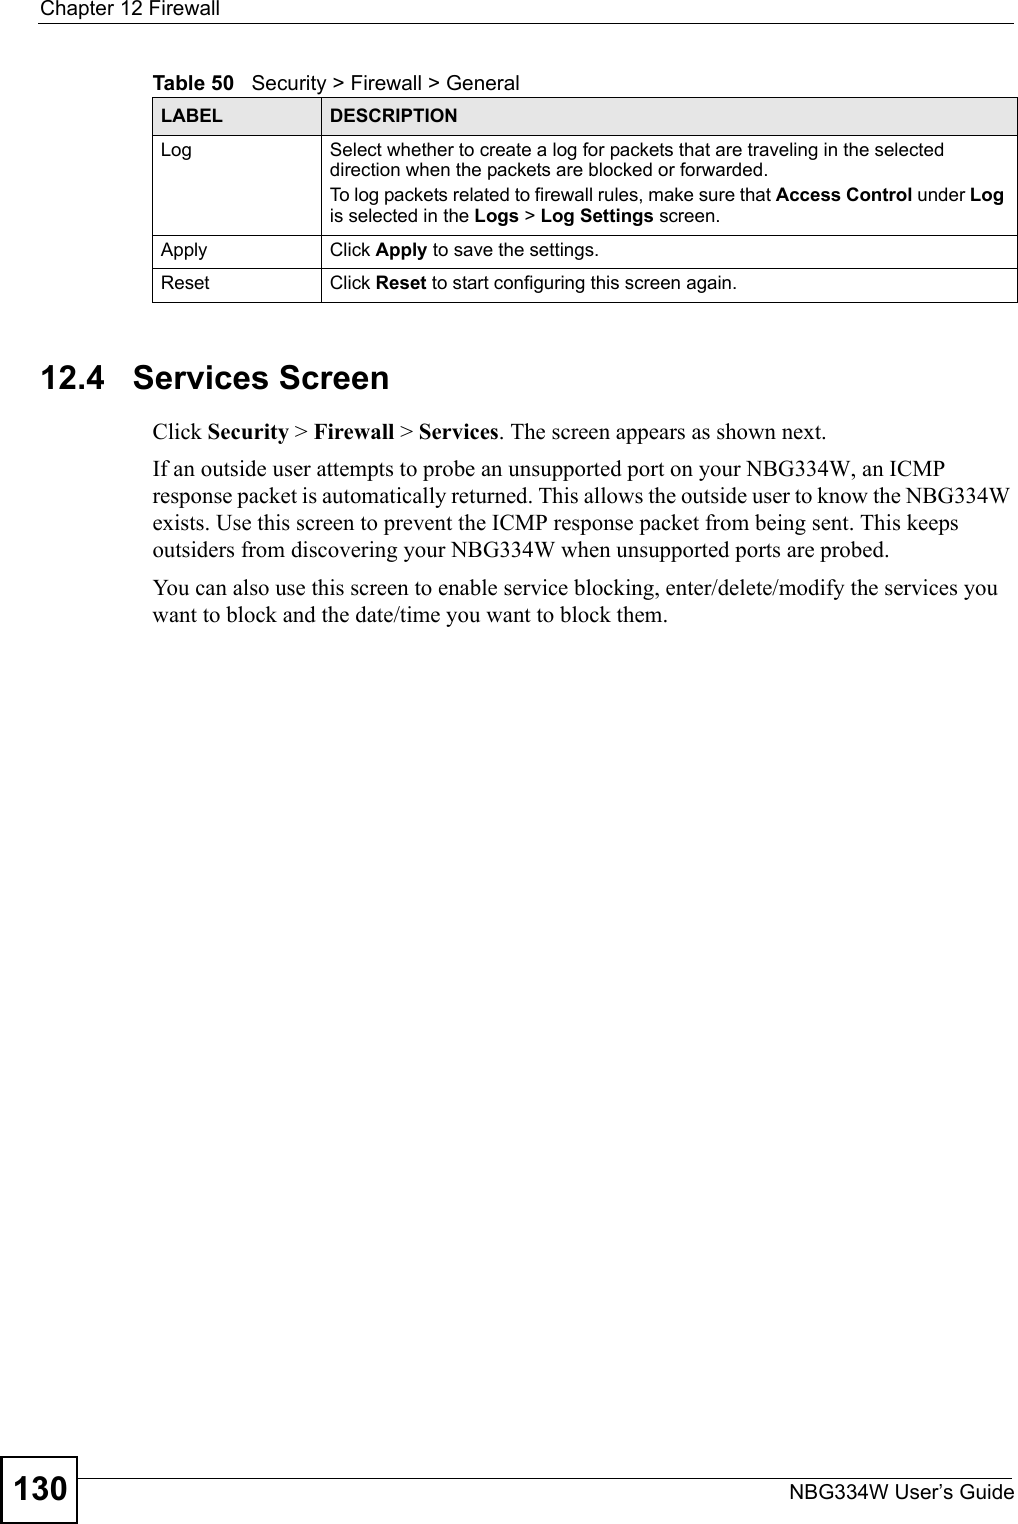 Chapter 12 FirewallNBG334W User’s Guide13012.4   Services ScreenClick Security &gt; Firewall &gt; Services. The screen appears as shown next. If an outside user attempts to probe an unsupported port on your NBG334W, an ICMP response packet is automatically returned. This allows the outside user to know the NBG334W exists. Use this screen to prevent the ICMP response packet from being sent. This keeps outsiders from discovering your NBG334W when unsupported ports are probed.You can also use this screen to enable service blocking, enter/delete/modify the services you want to block and the date/time you want to block them.Log Select whether to create a log for packets that are traveling in the selected direction when the packets are blocked or forwarded.To log packets related to firewall rules, make sure that Access Control under Log is selected in the Logs &gt; Log Settings screen. Apply Click Apply to save the settings. Reset Click Reset to start configuring this screen again. Table 50   Security &gt; Firewall &gt; General LABEL DESCRIPTION